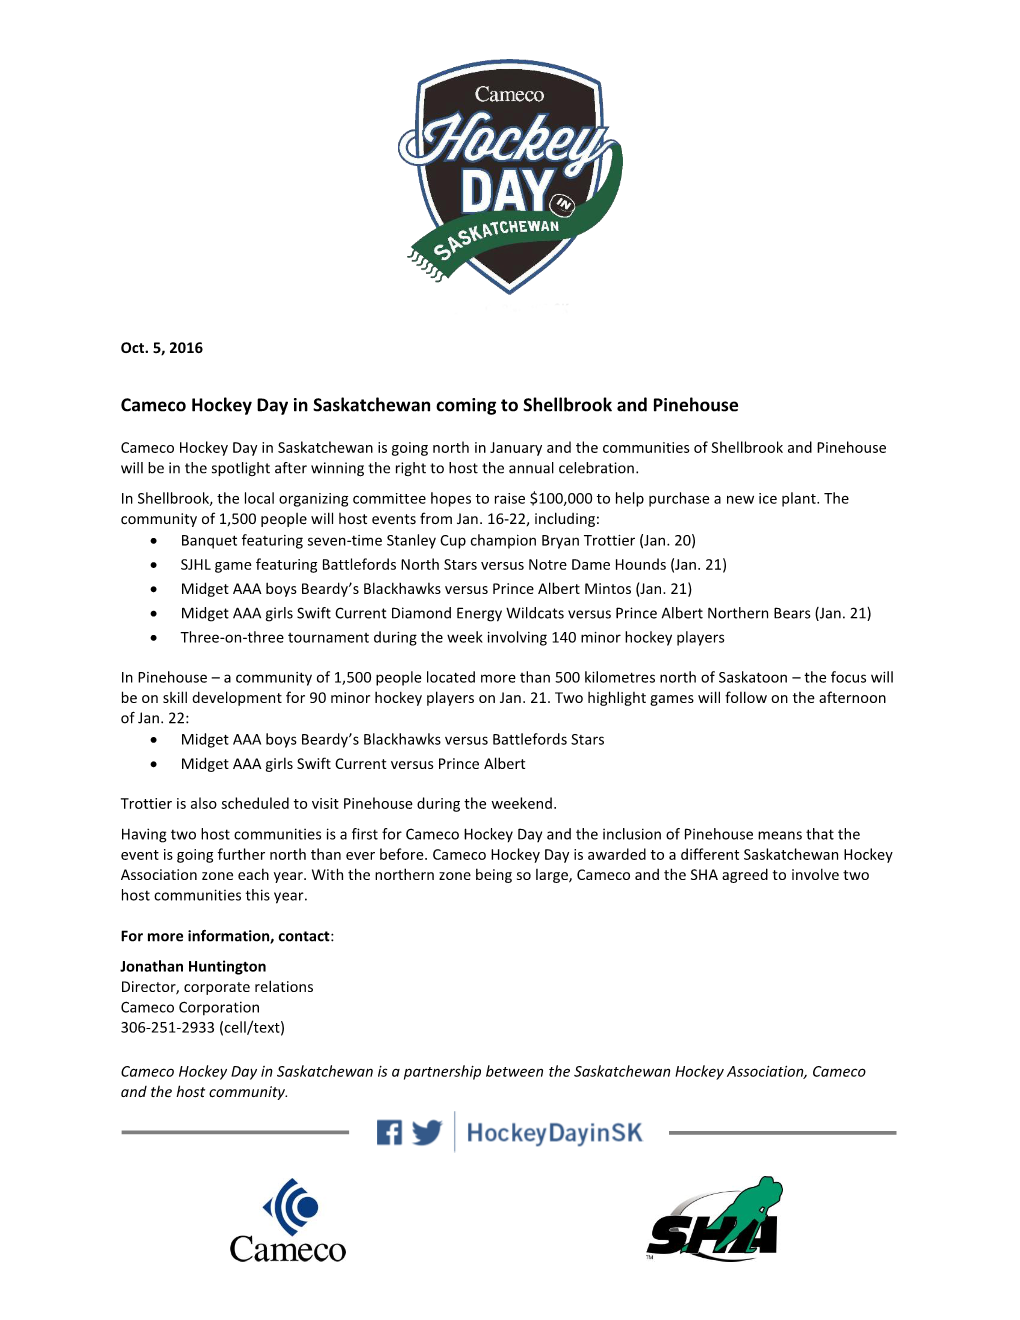 Cameco Hockey Day in Saskatchewan Coming to Shellbrook and Pinehouse